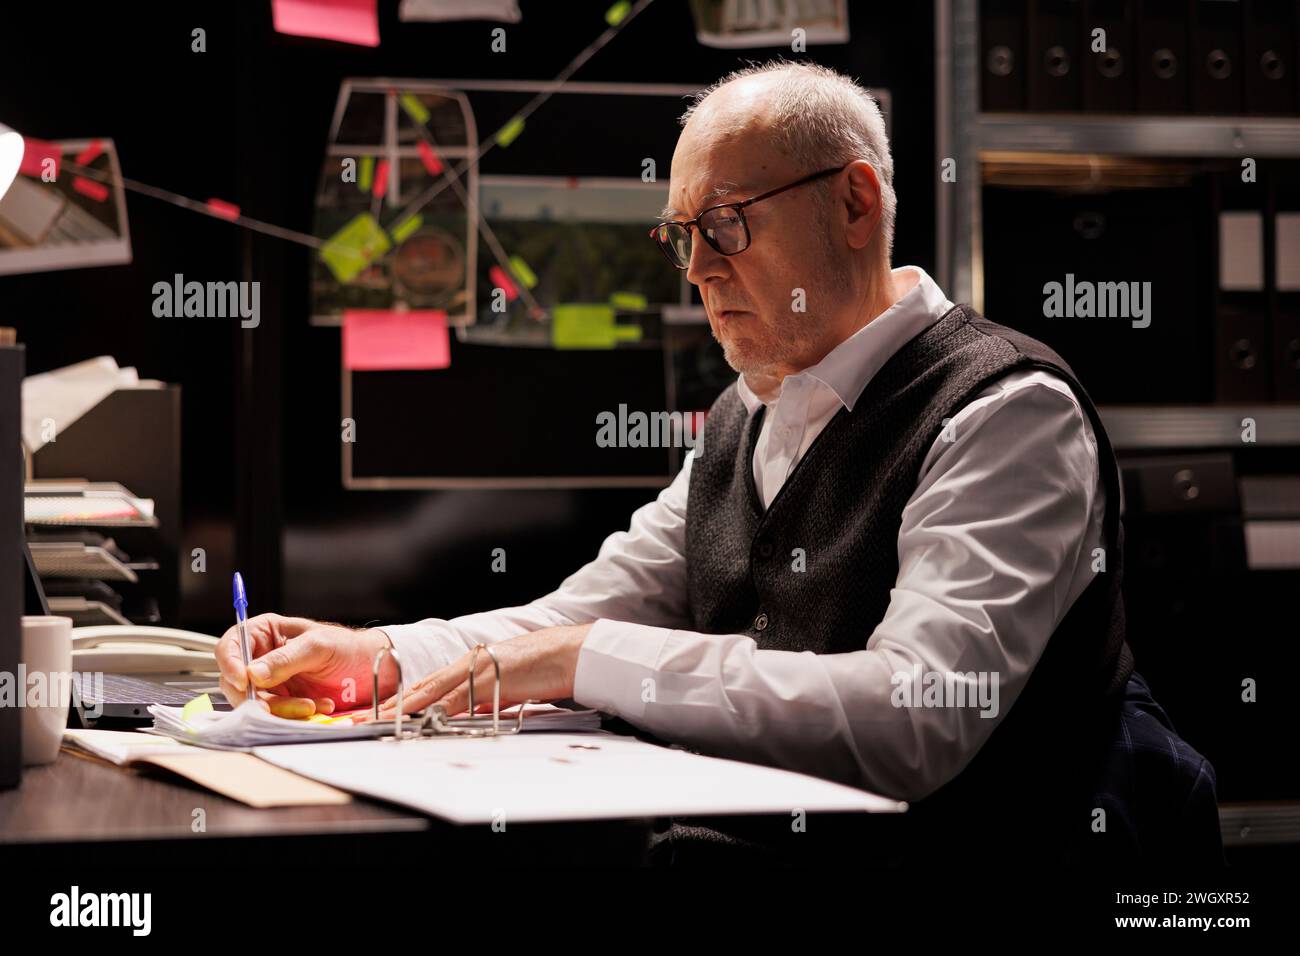 Senior investigator writing criminal case report, working overhours at federal investigations in arhive room. Tired elderly private detective analyzing crime scene evidence, checking suspect files Stock Photo